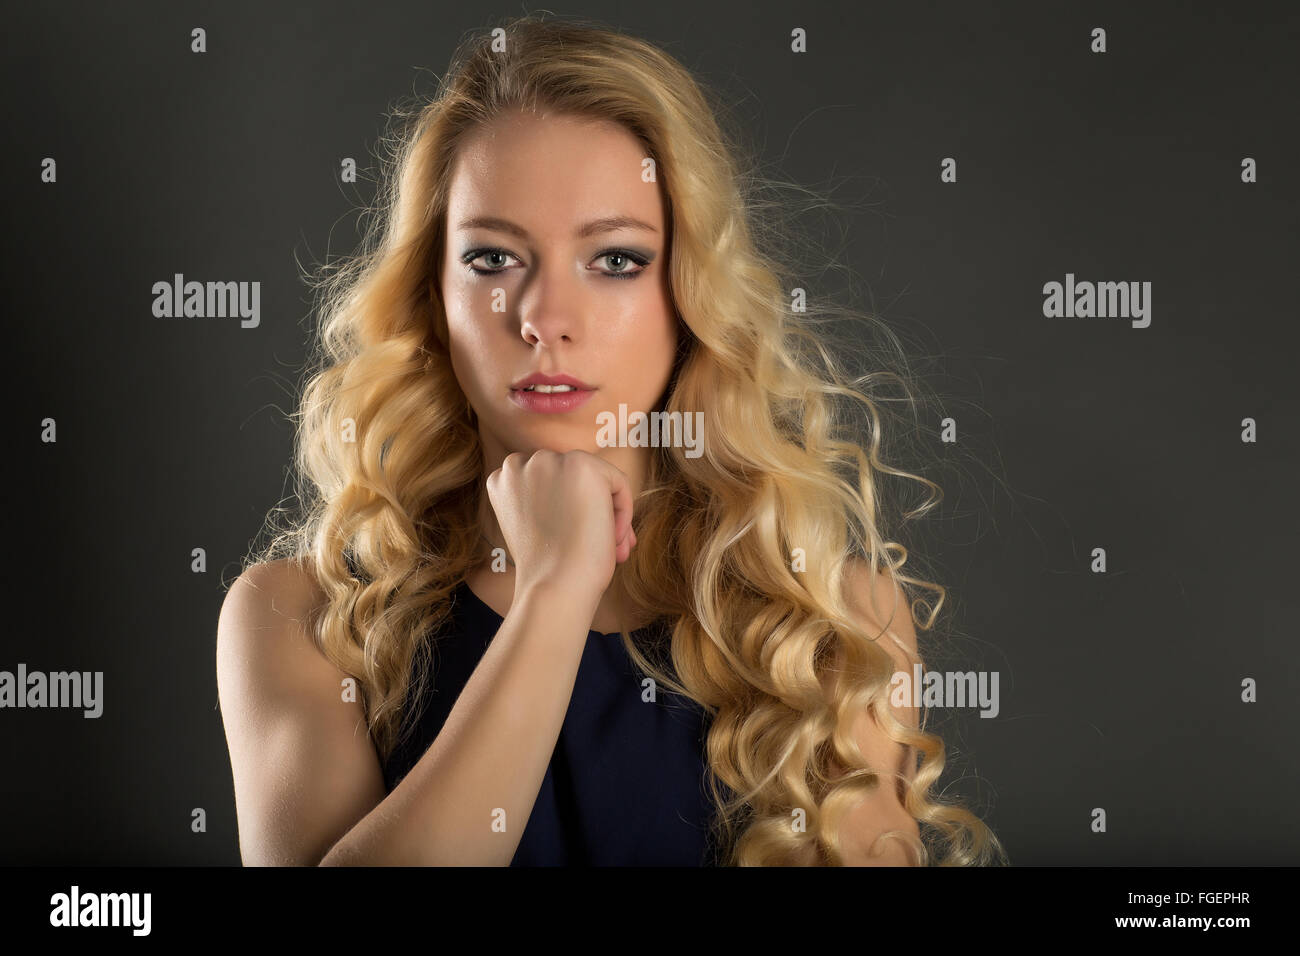 Young blond woman Stock Photo